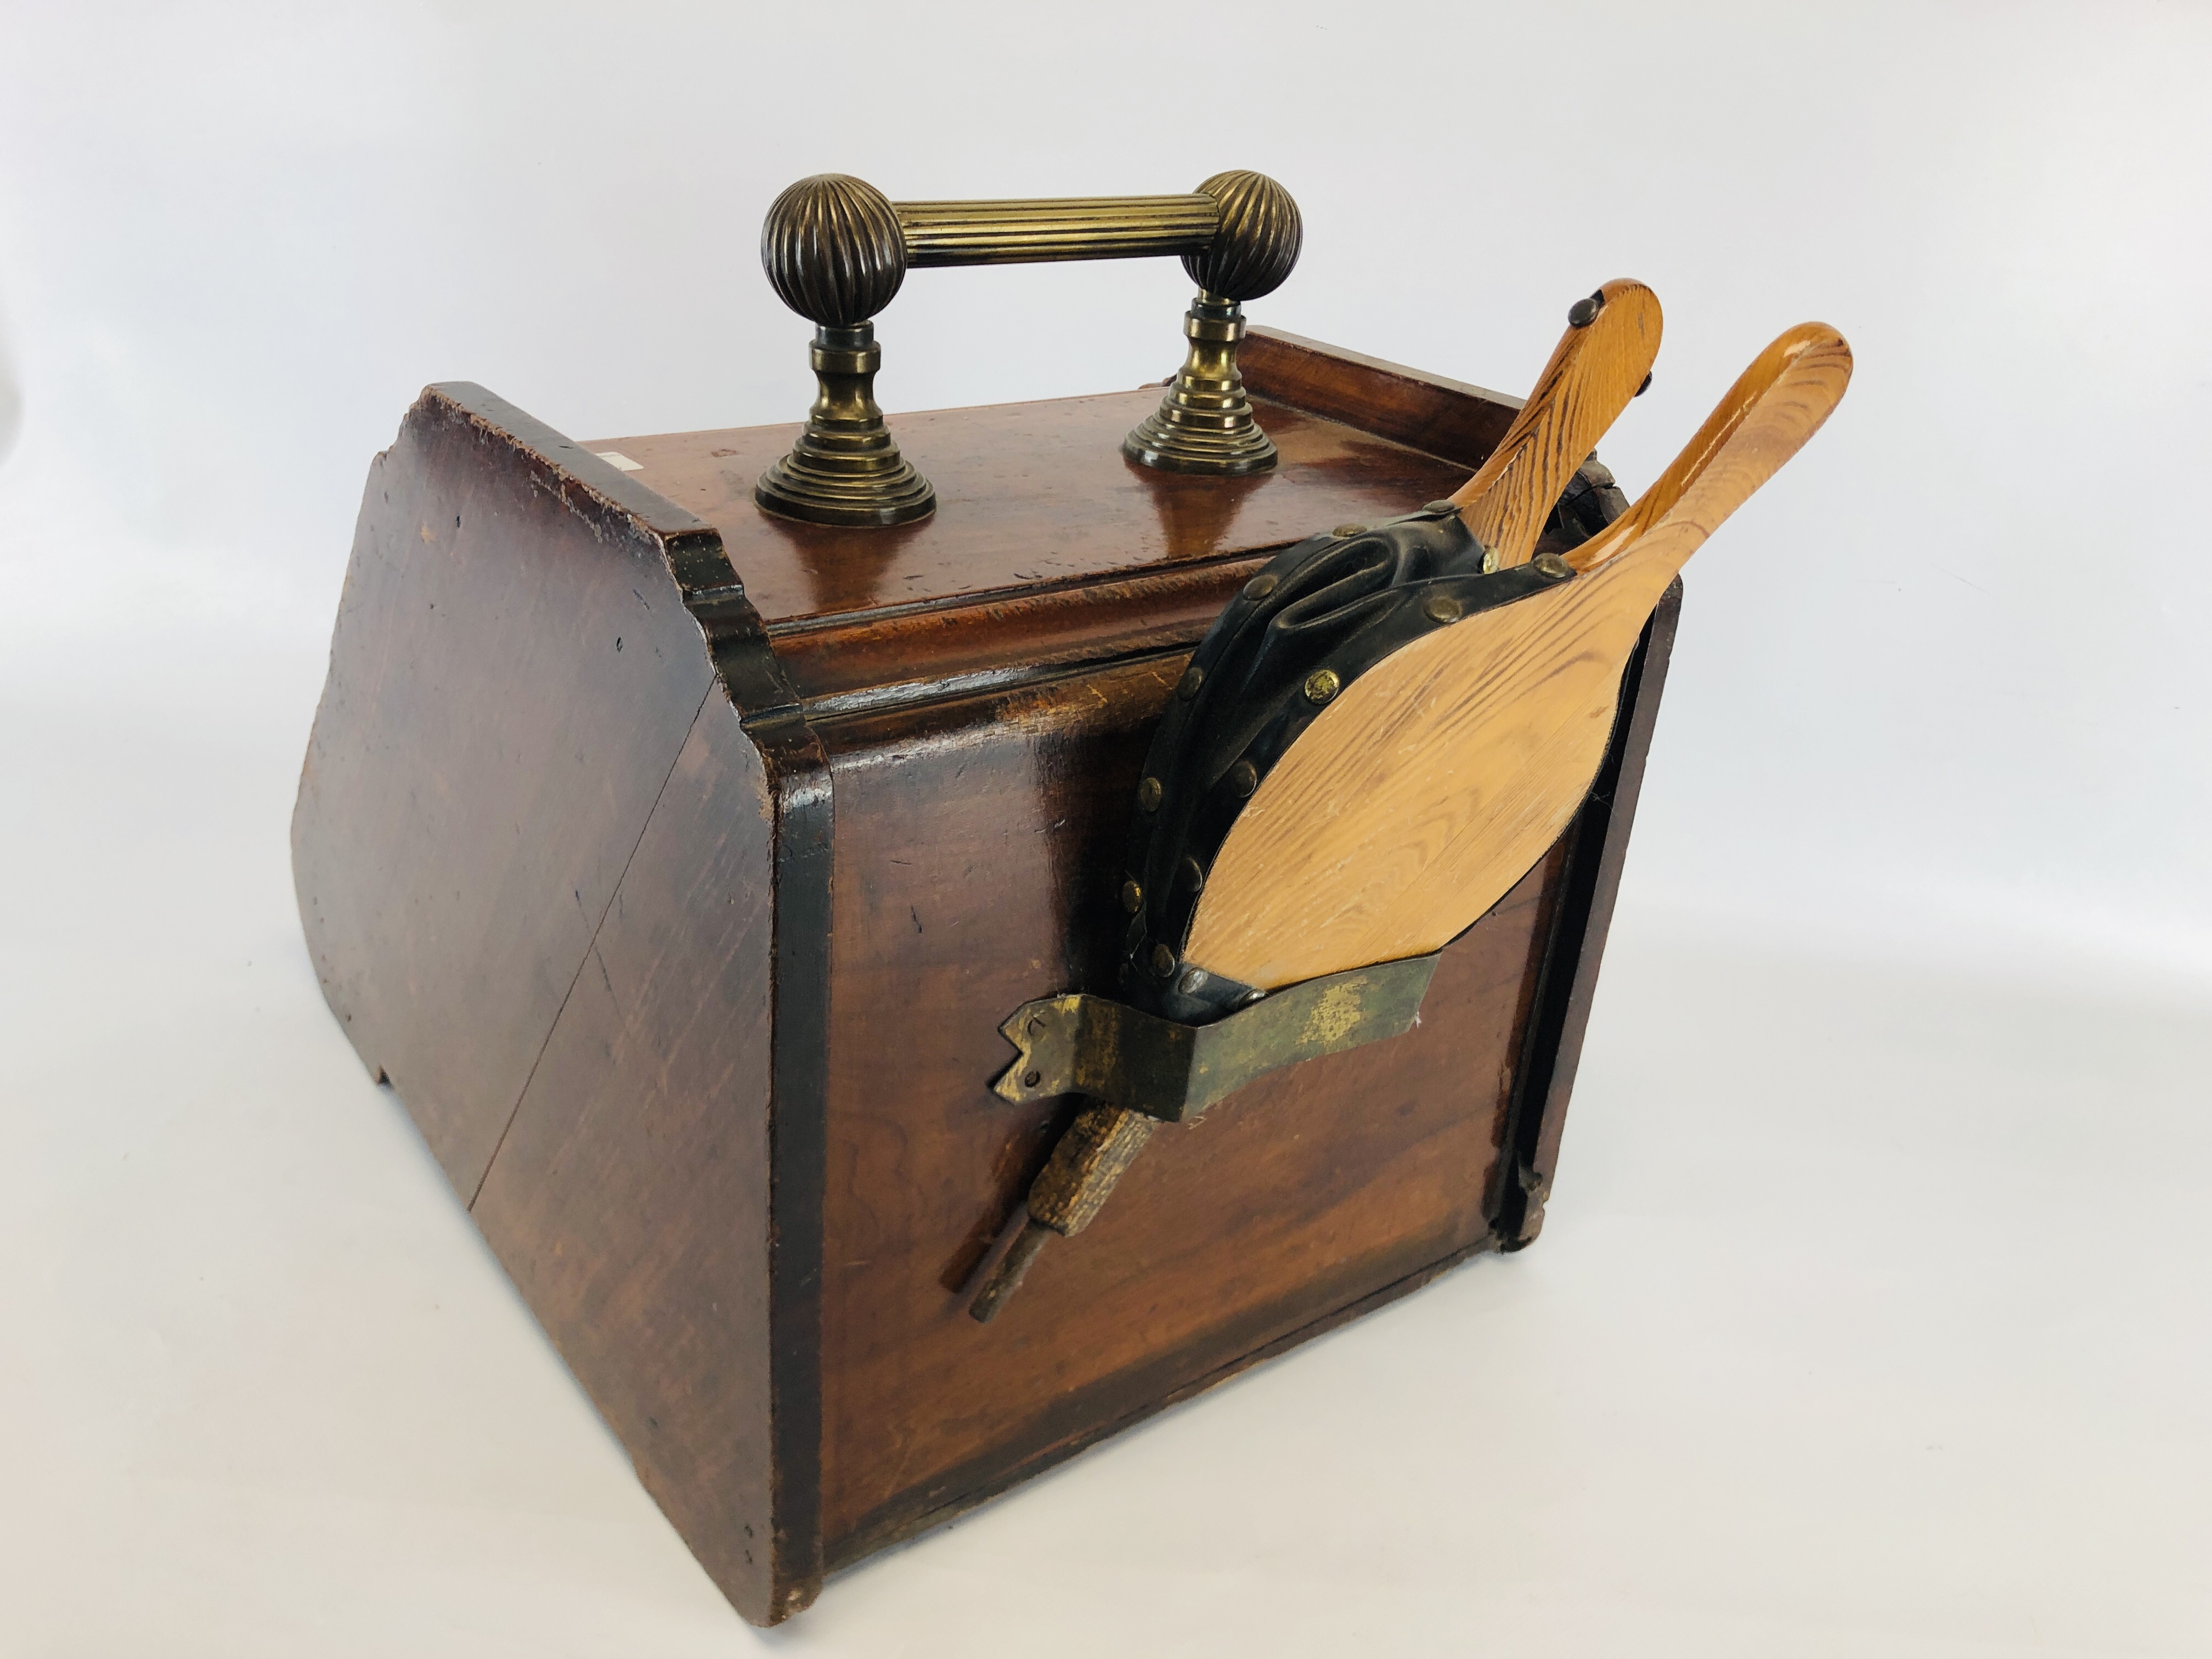 ANTIQUE EDWARDIAN MAHOGANY AND BRASS COAL BOX WITH BELLOWS. - Image 7 of 7